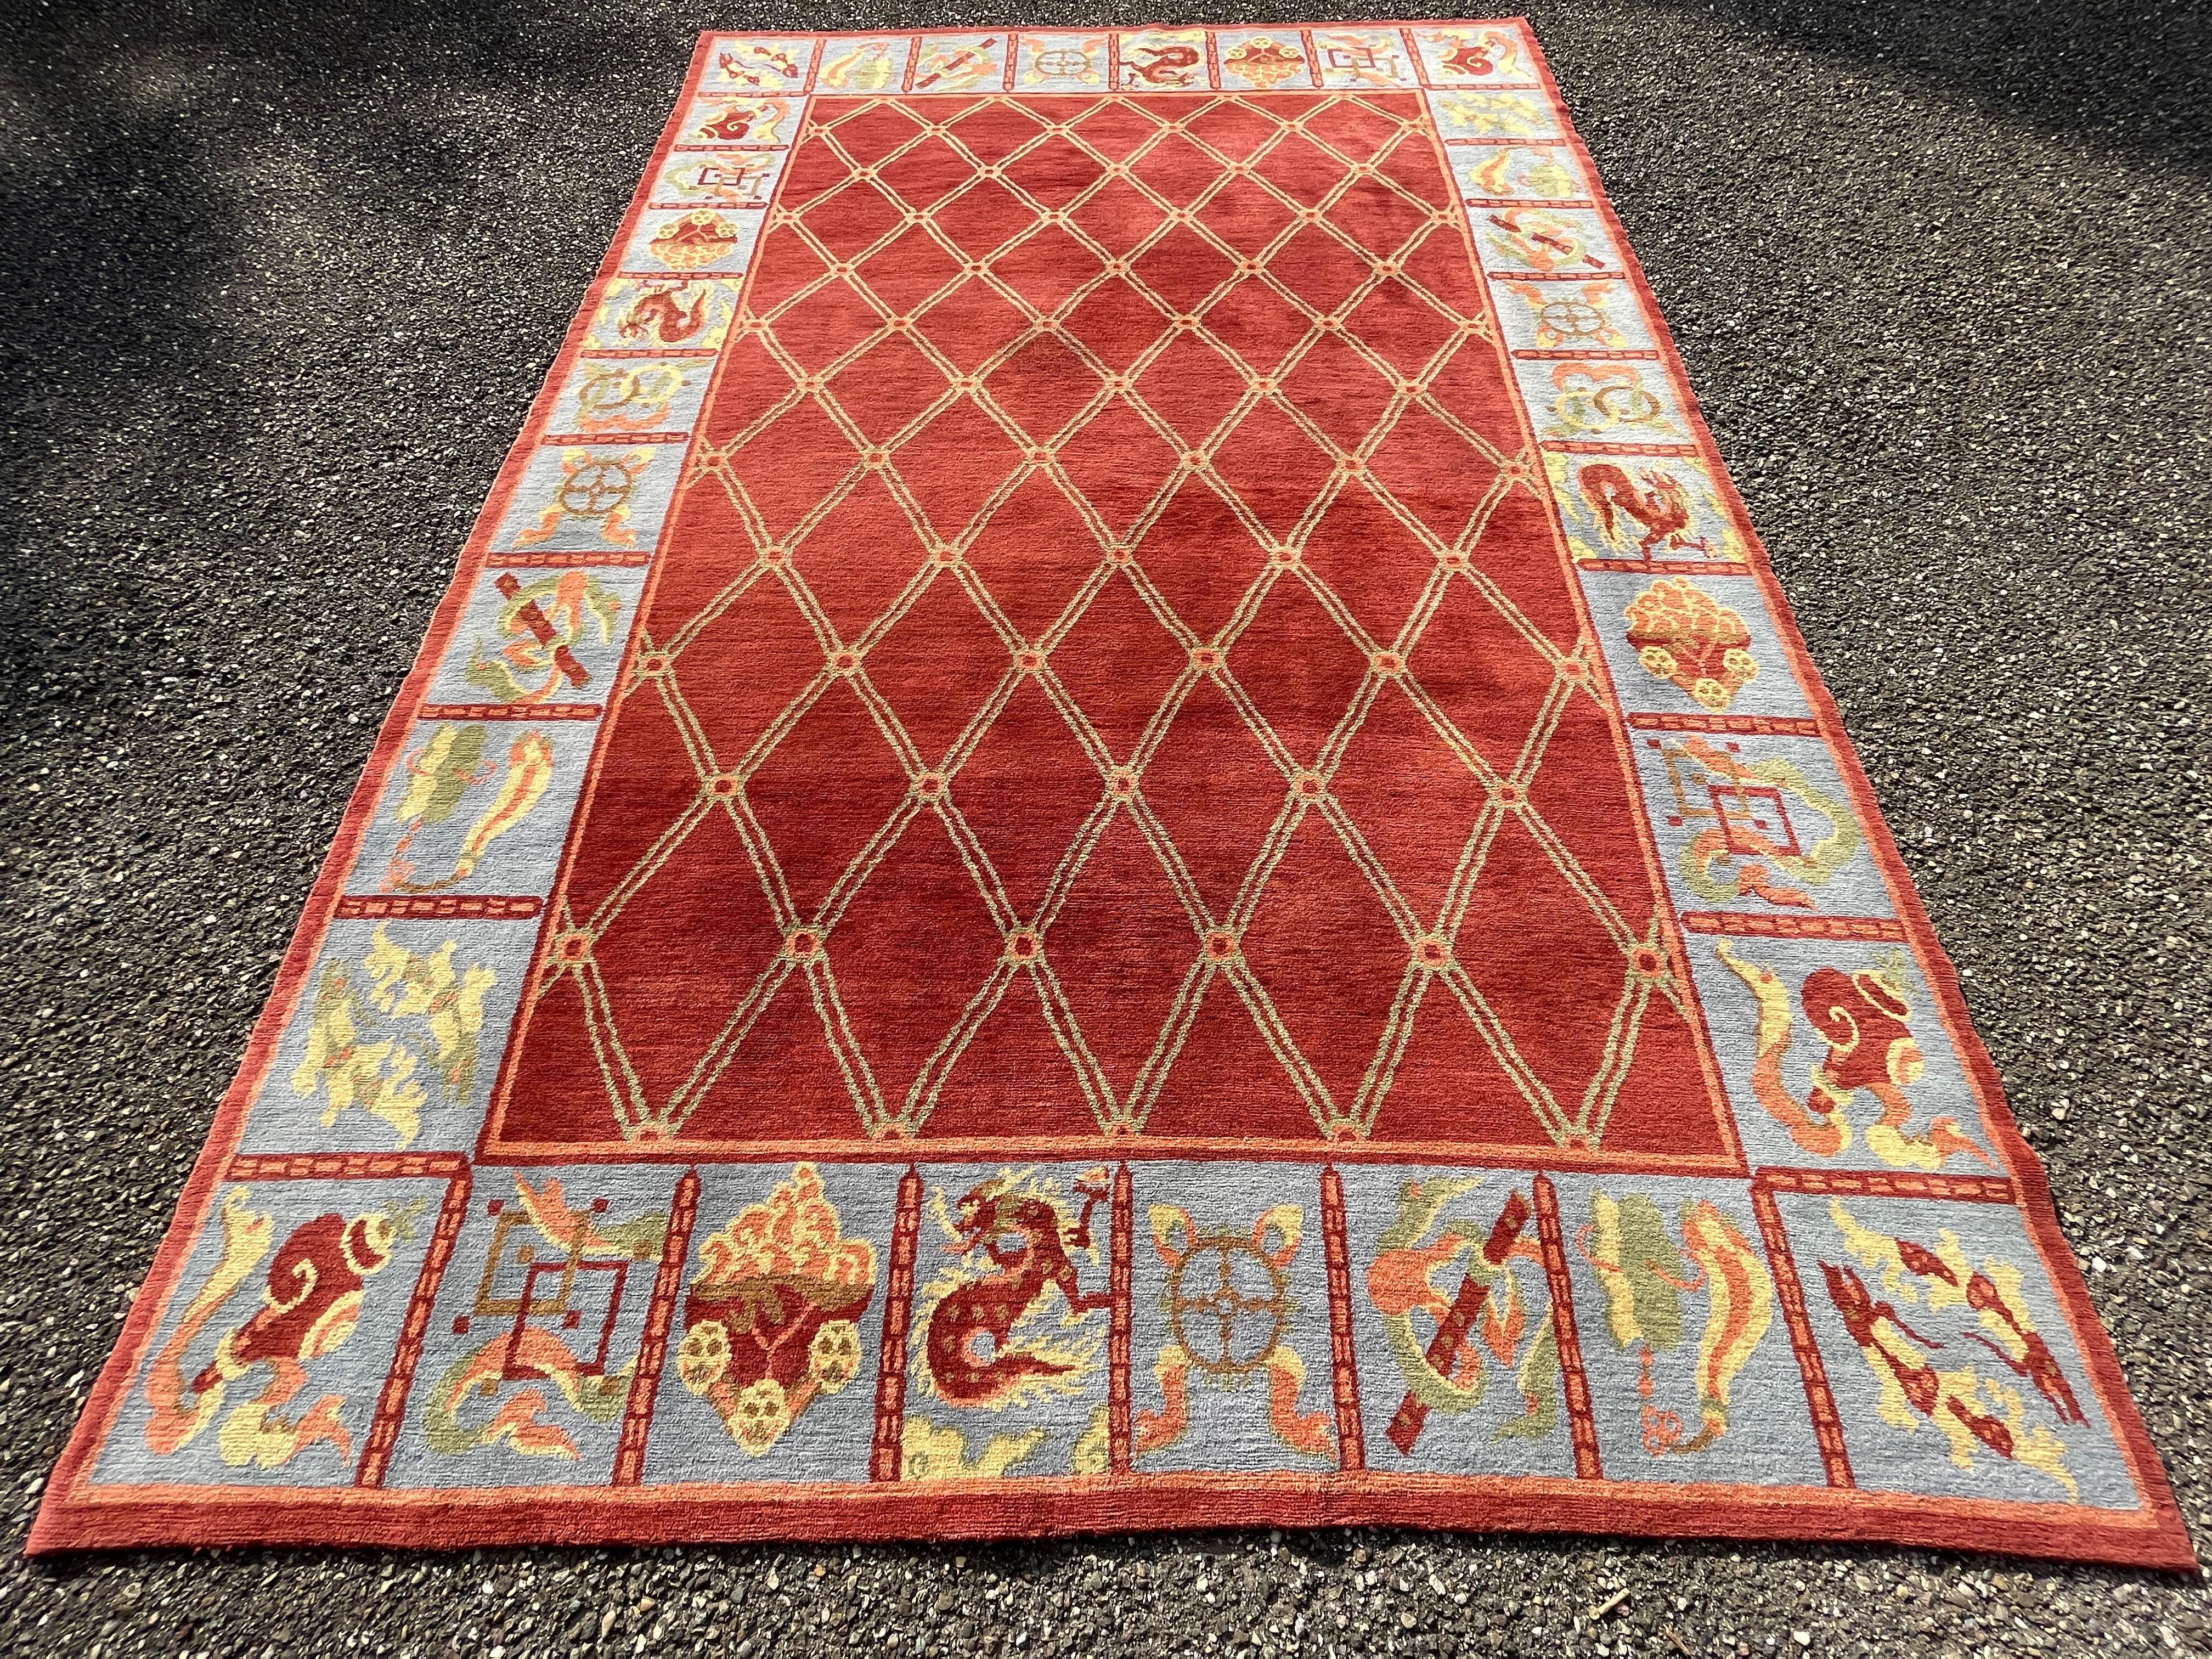 Elegant rug from Tibet, circa 1970.

Woolen rug with checkered decoration on a brick red background framed by a compartmentalized border decorated with stylized symbols and dragons.

Modern Tibetan rugs have been handcrafted for centuries.